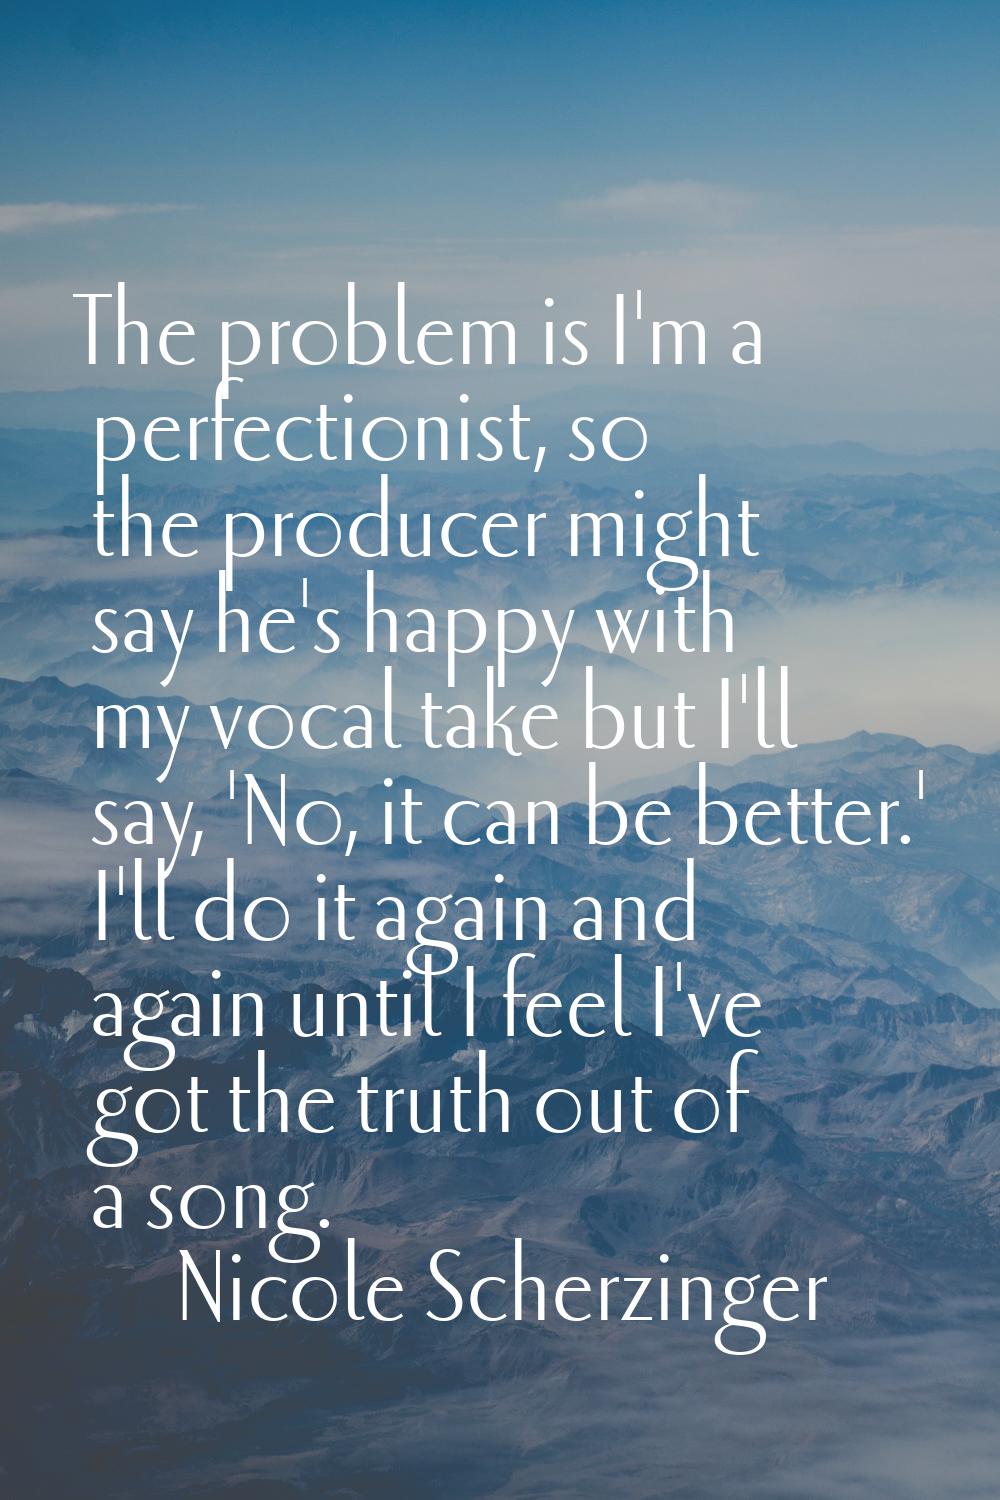 The problem is I'm a perfectionist, so the producer might say he's happy with my vocal take but I'l